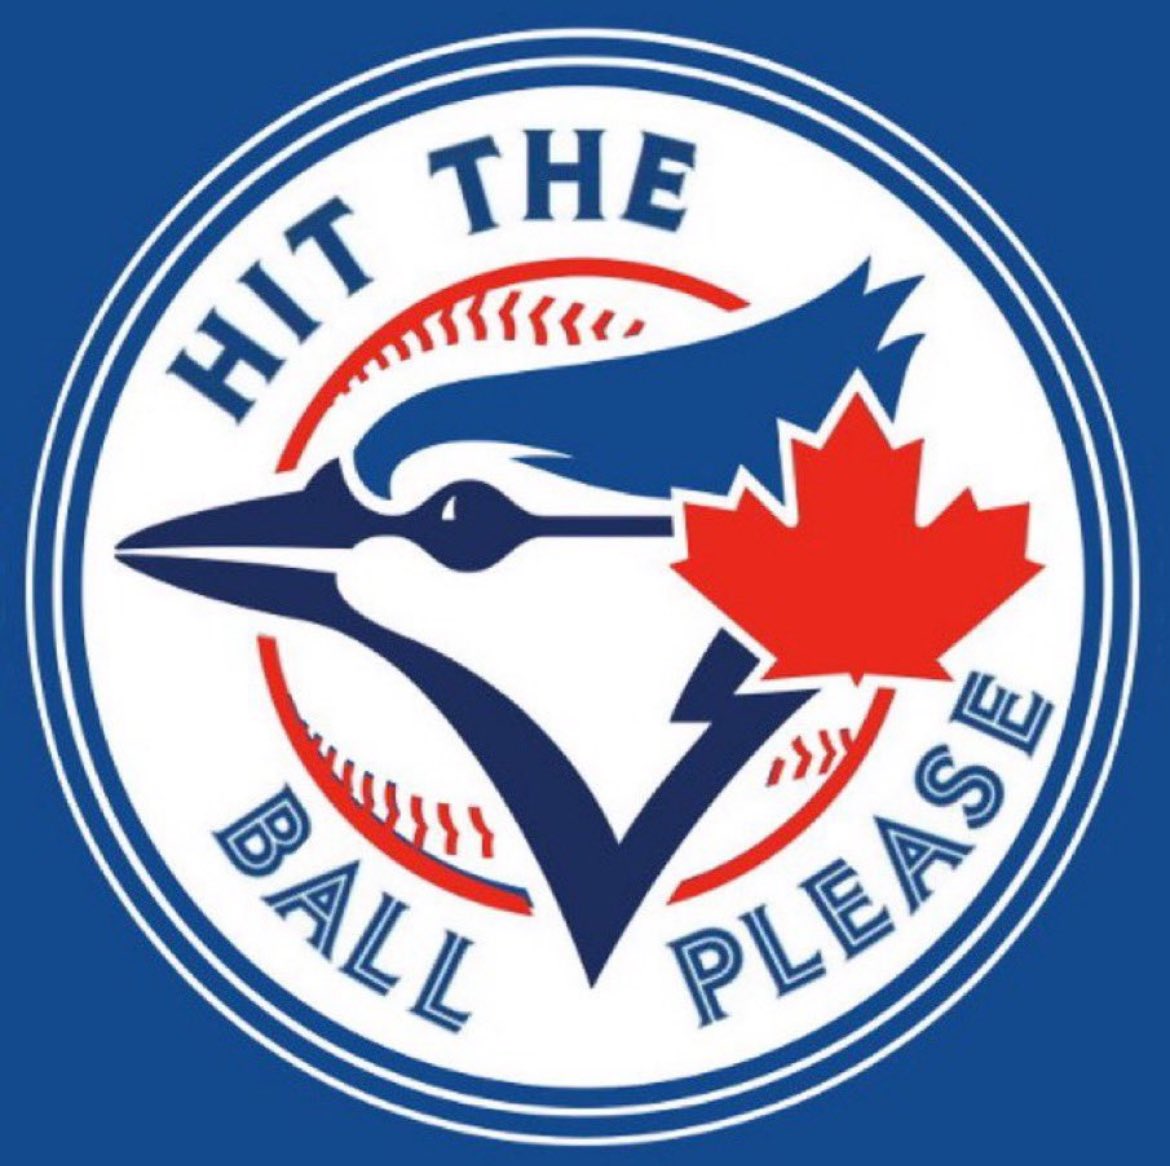 Who’s getting fired first?! #bluejays #torontobluejays